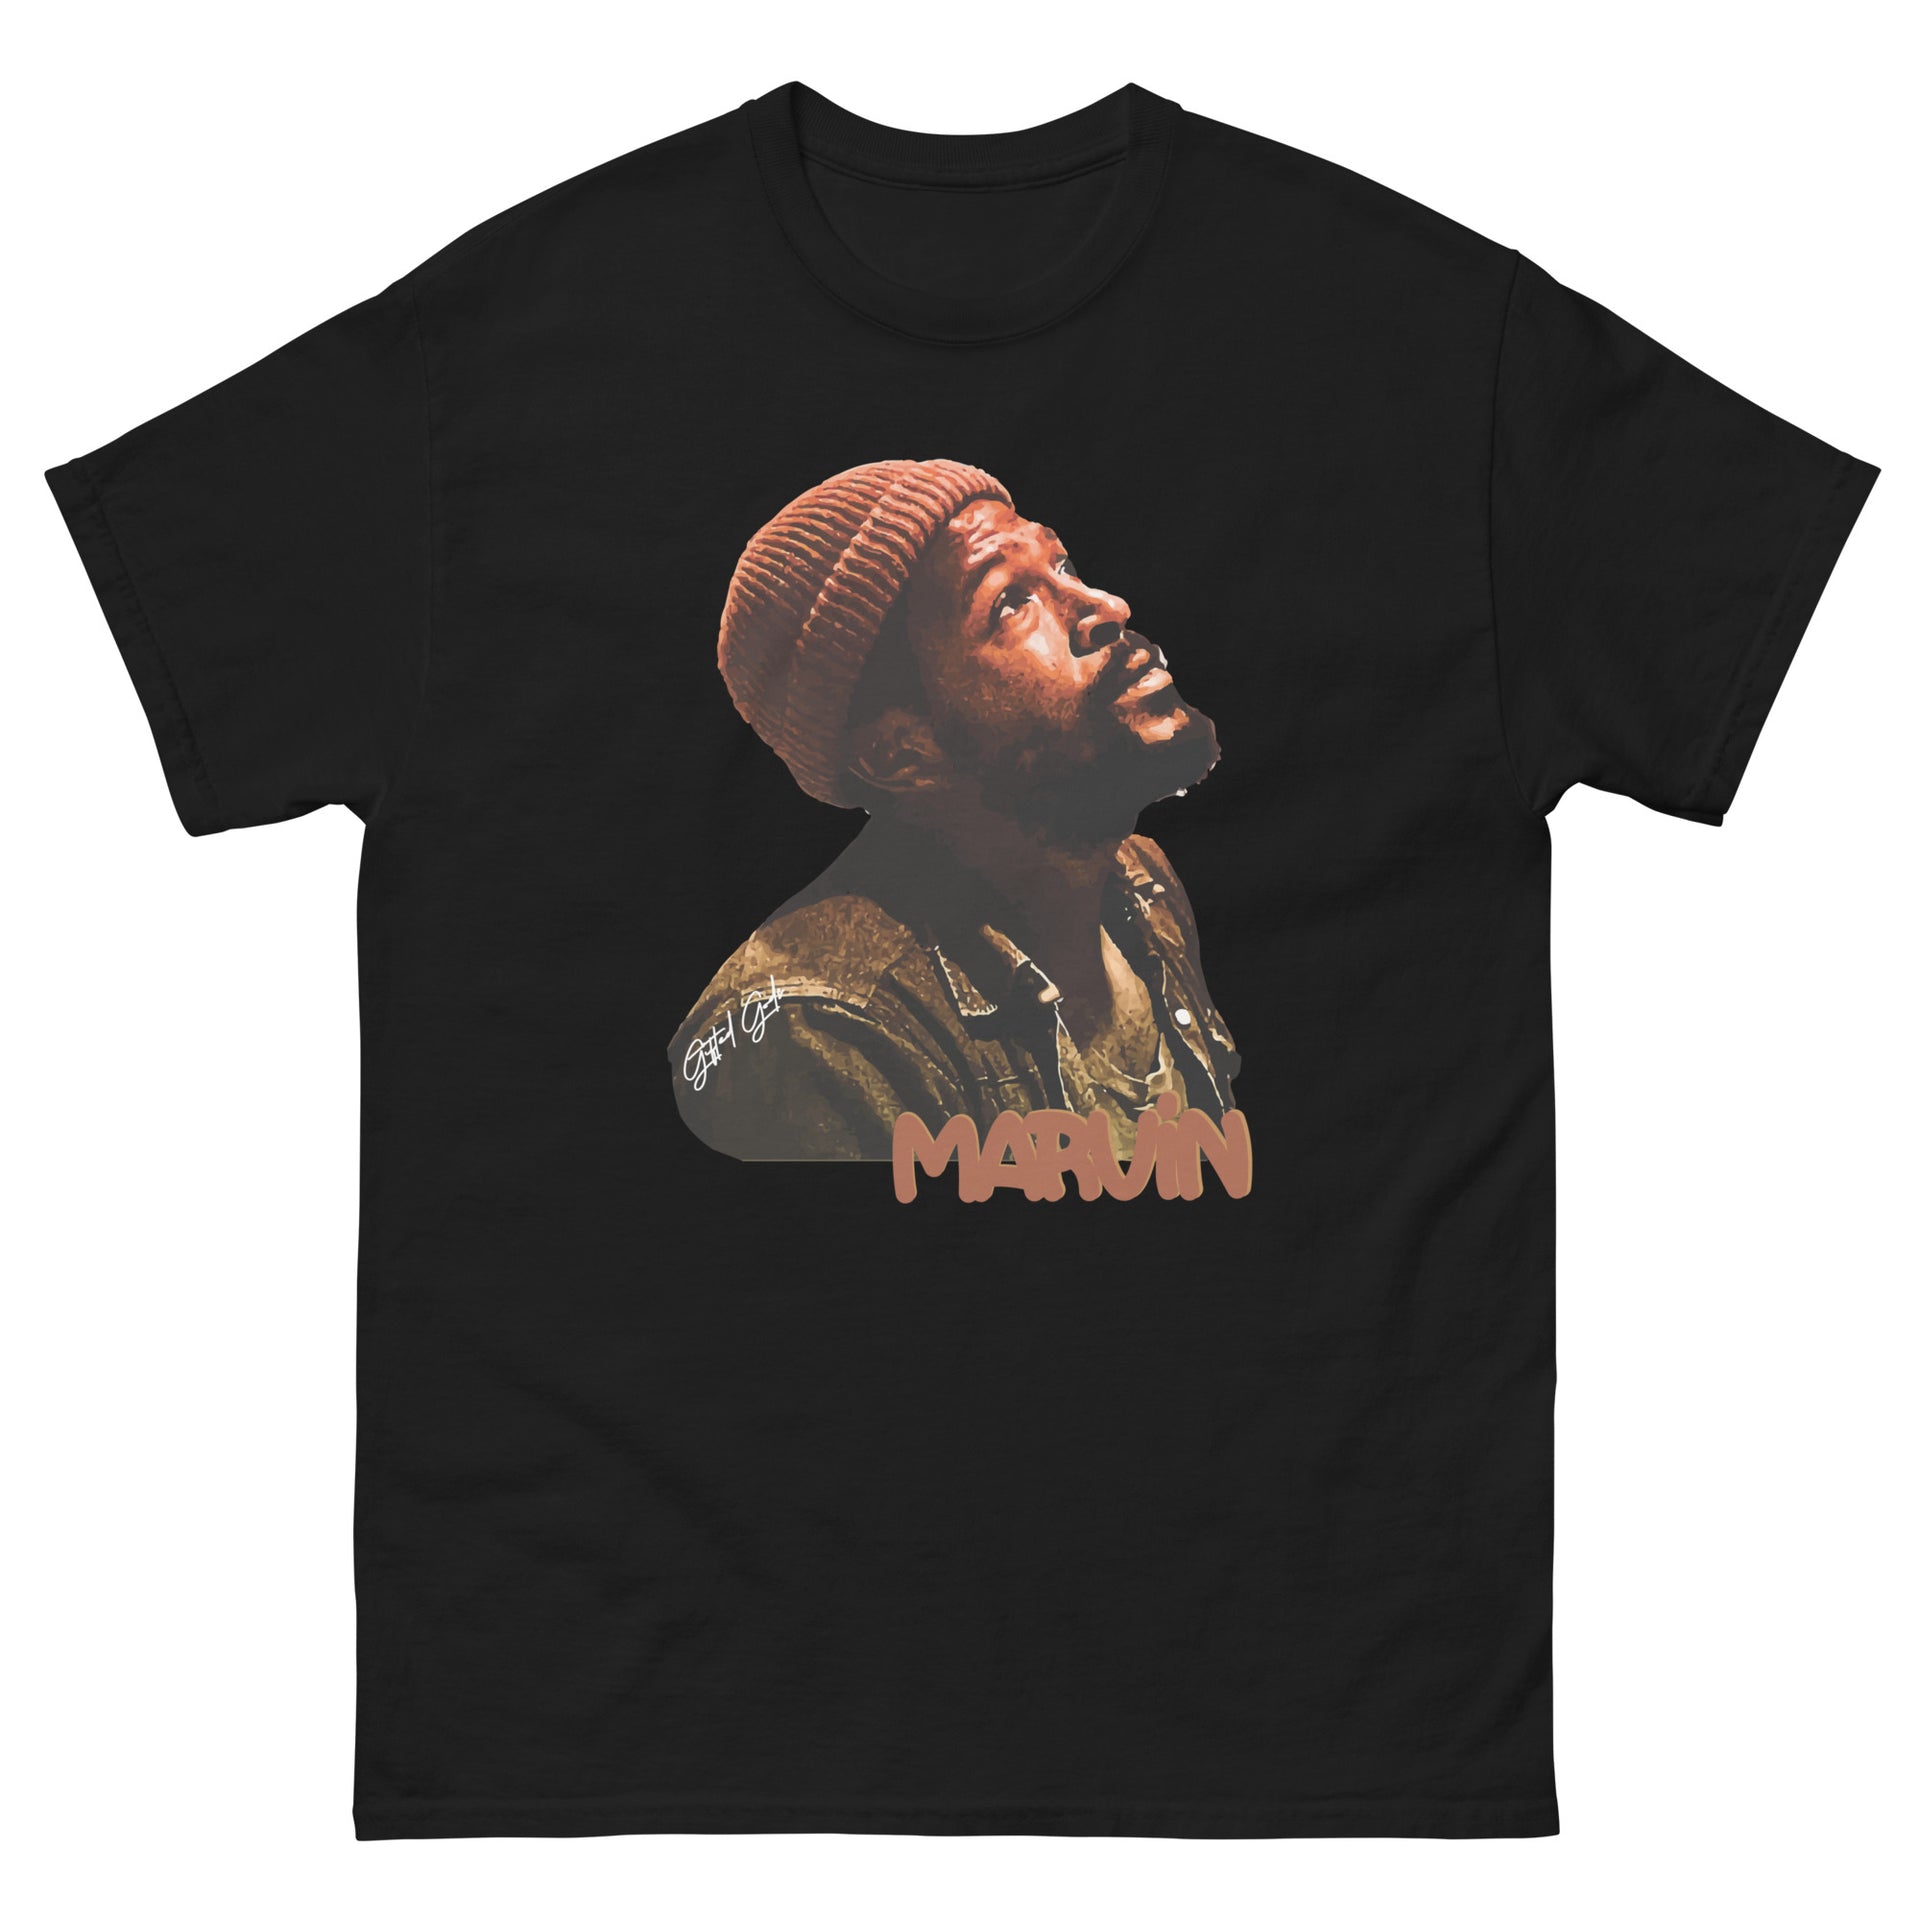 New Marvin Gaye Trouble Man Album Cover 100% Cotton Uniqlo T Shirt Large